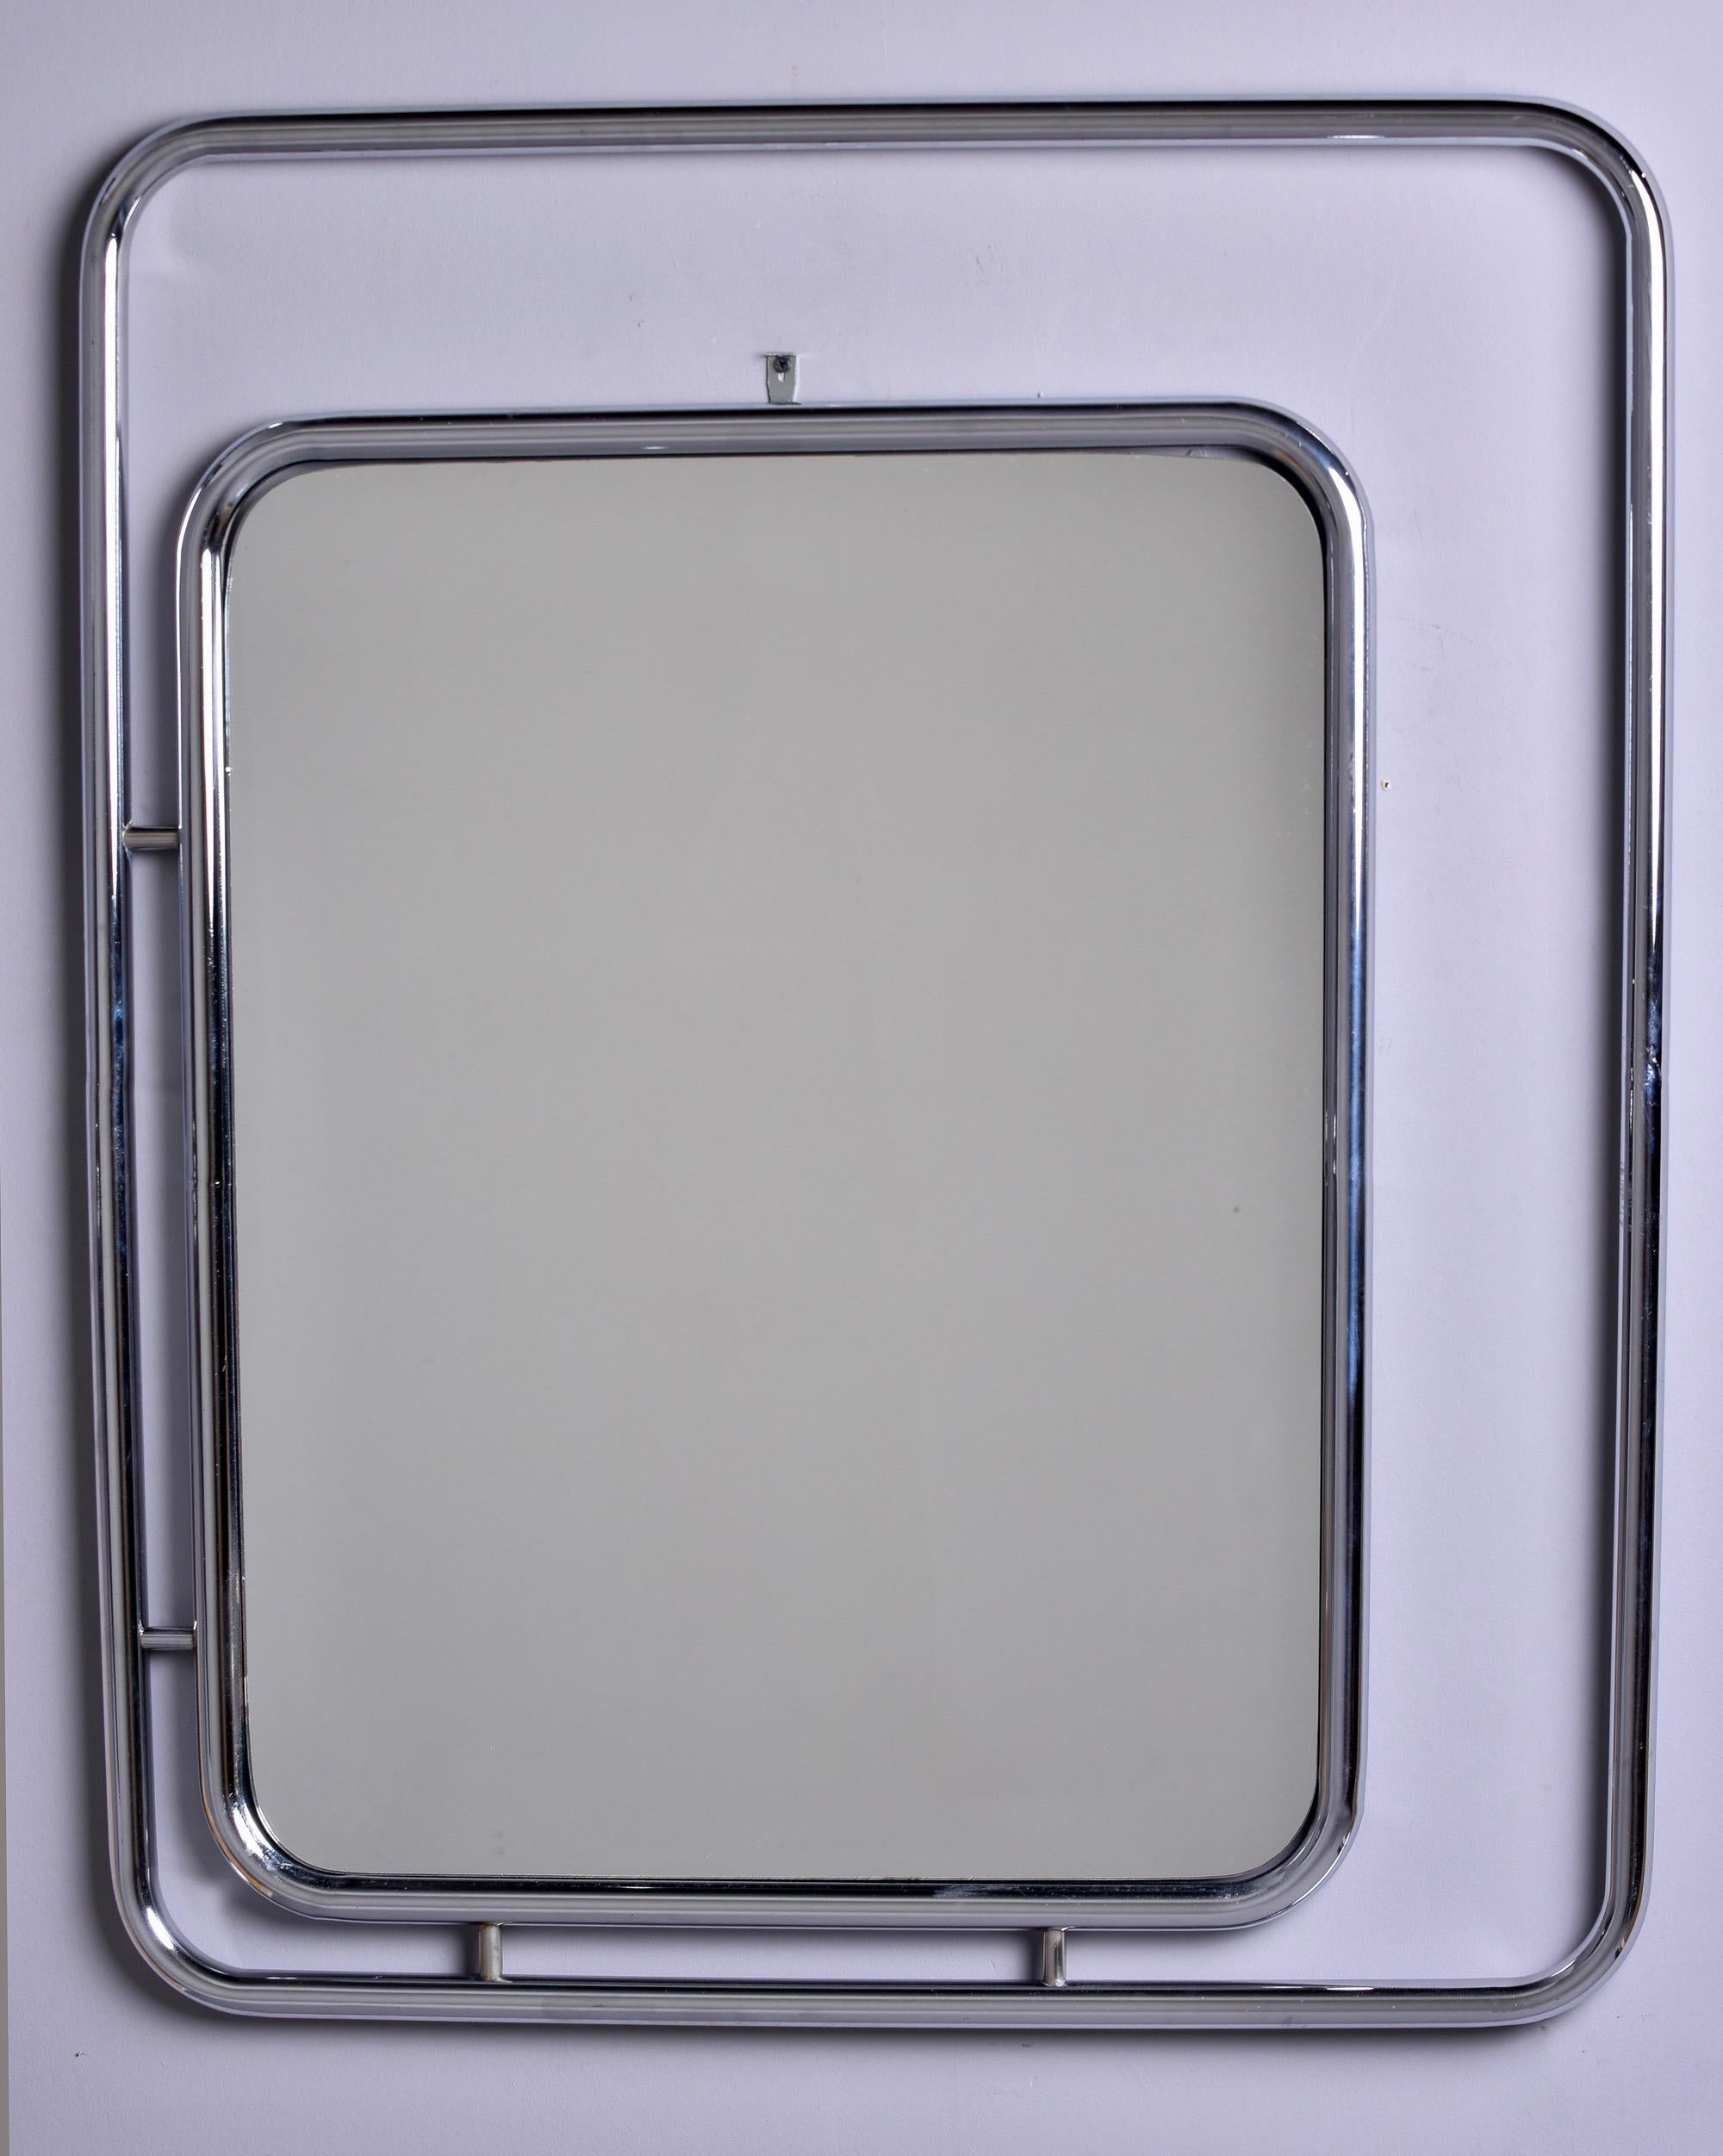 Mid-Century Modern Italian Mid Century Chrome Trimmed Square Mirror Within Chrome Frame For Sale